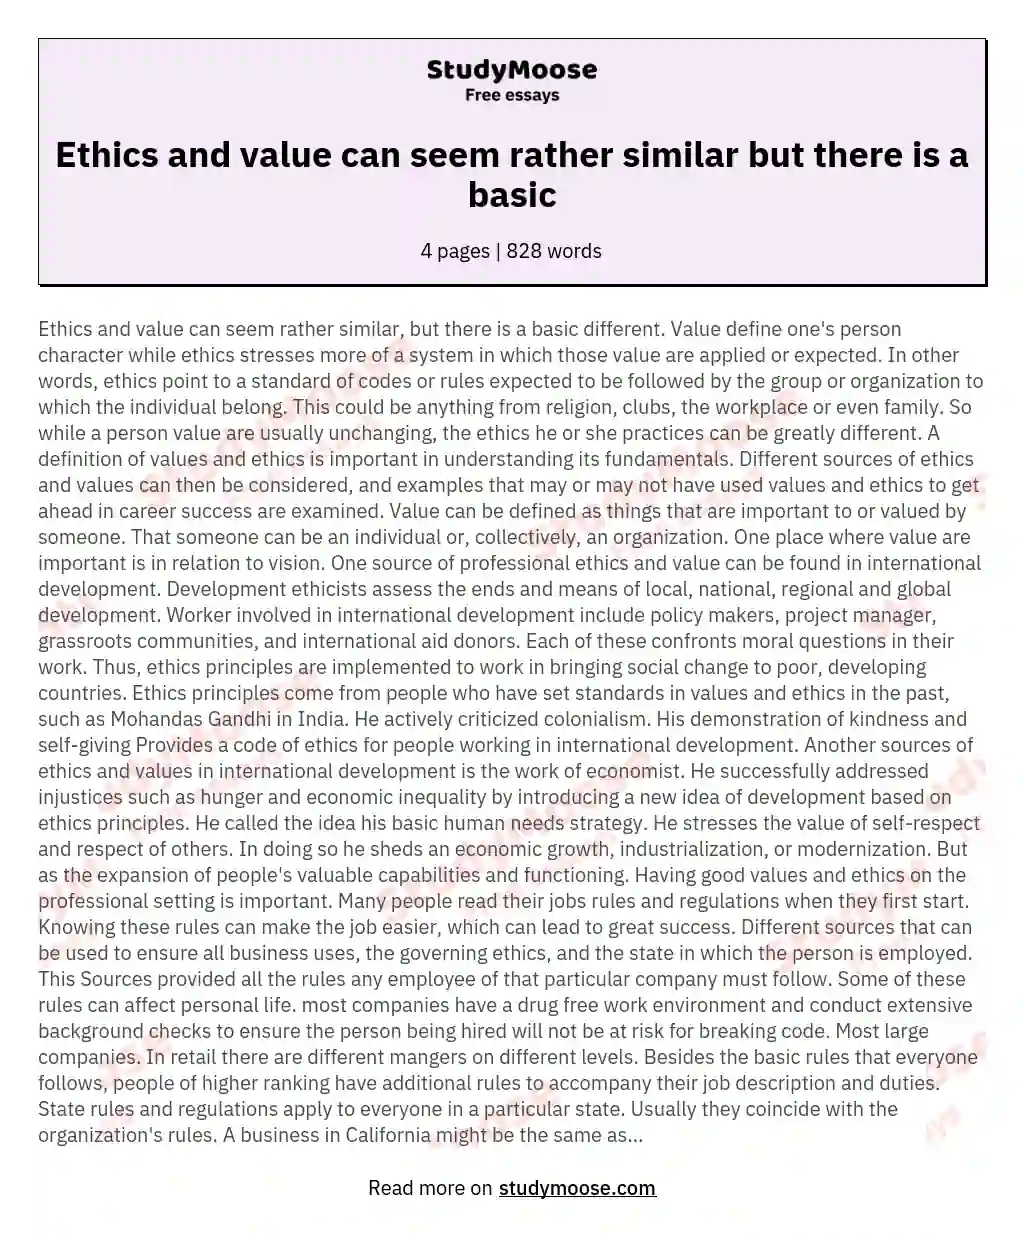 Ethics and value can seem rather similar but there is a basic